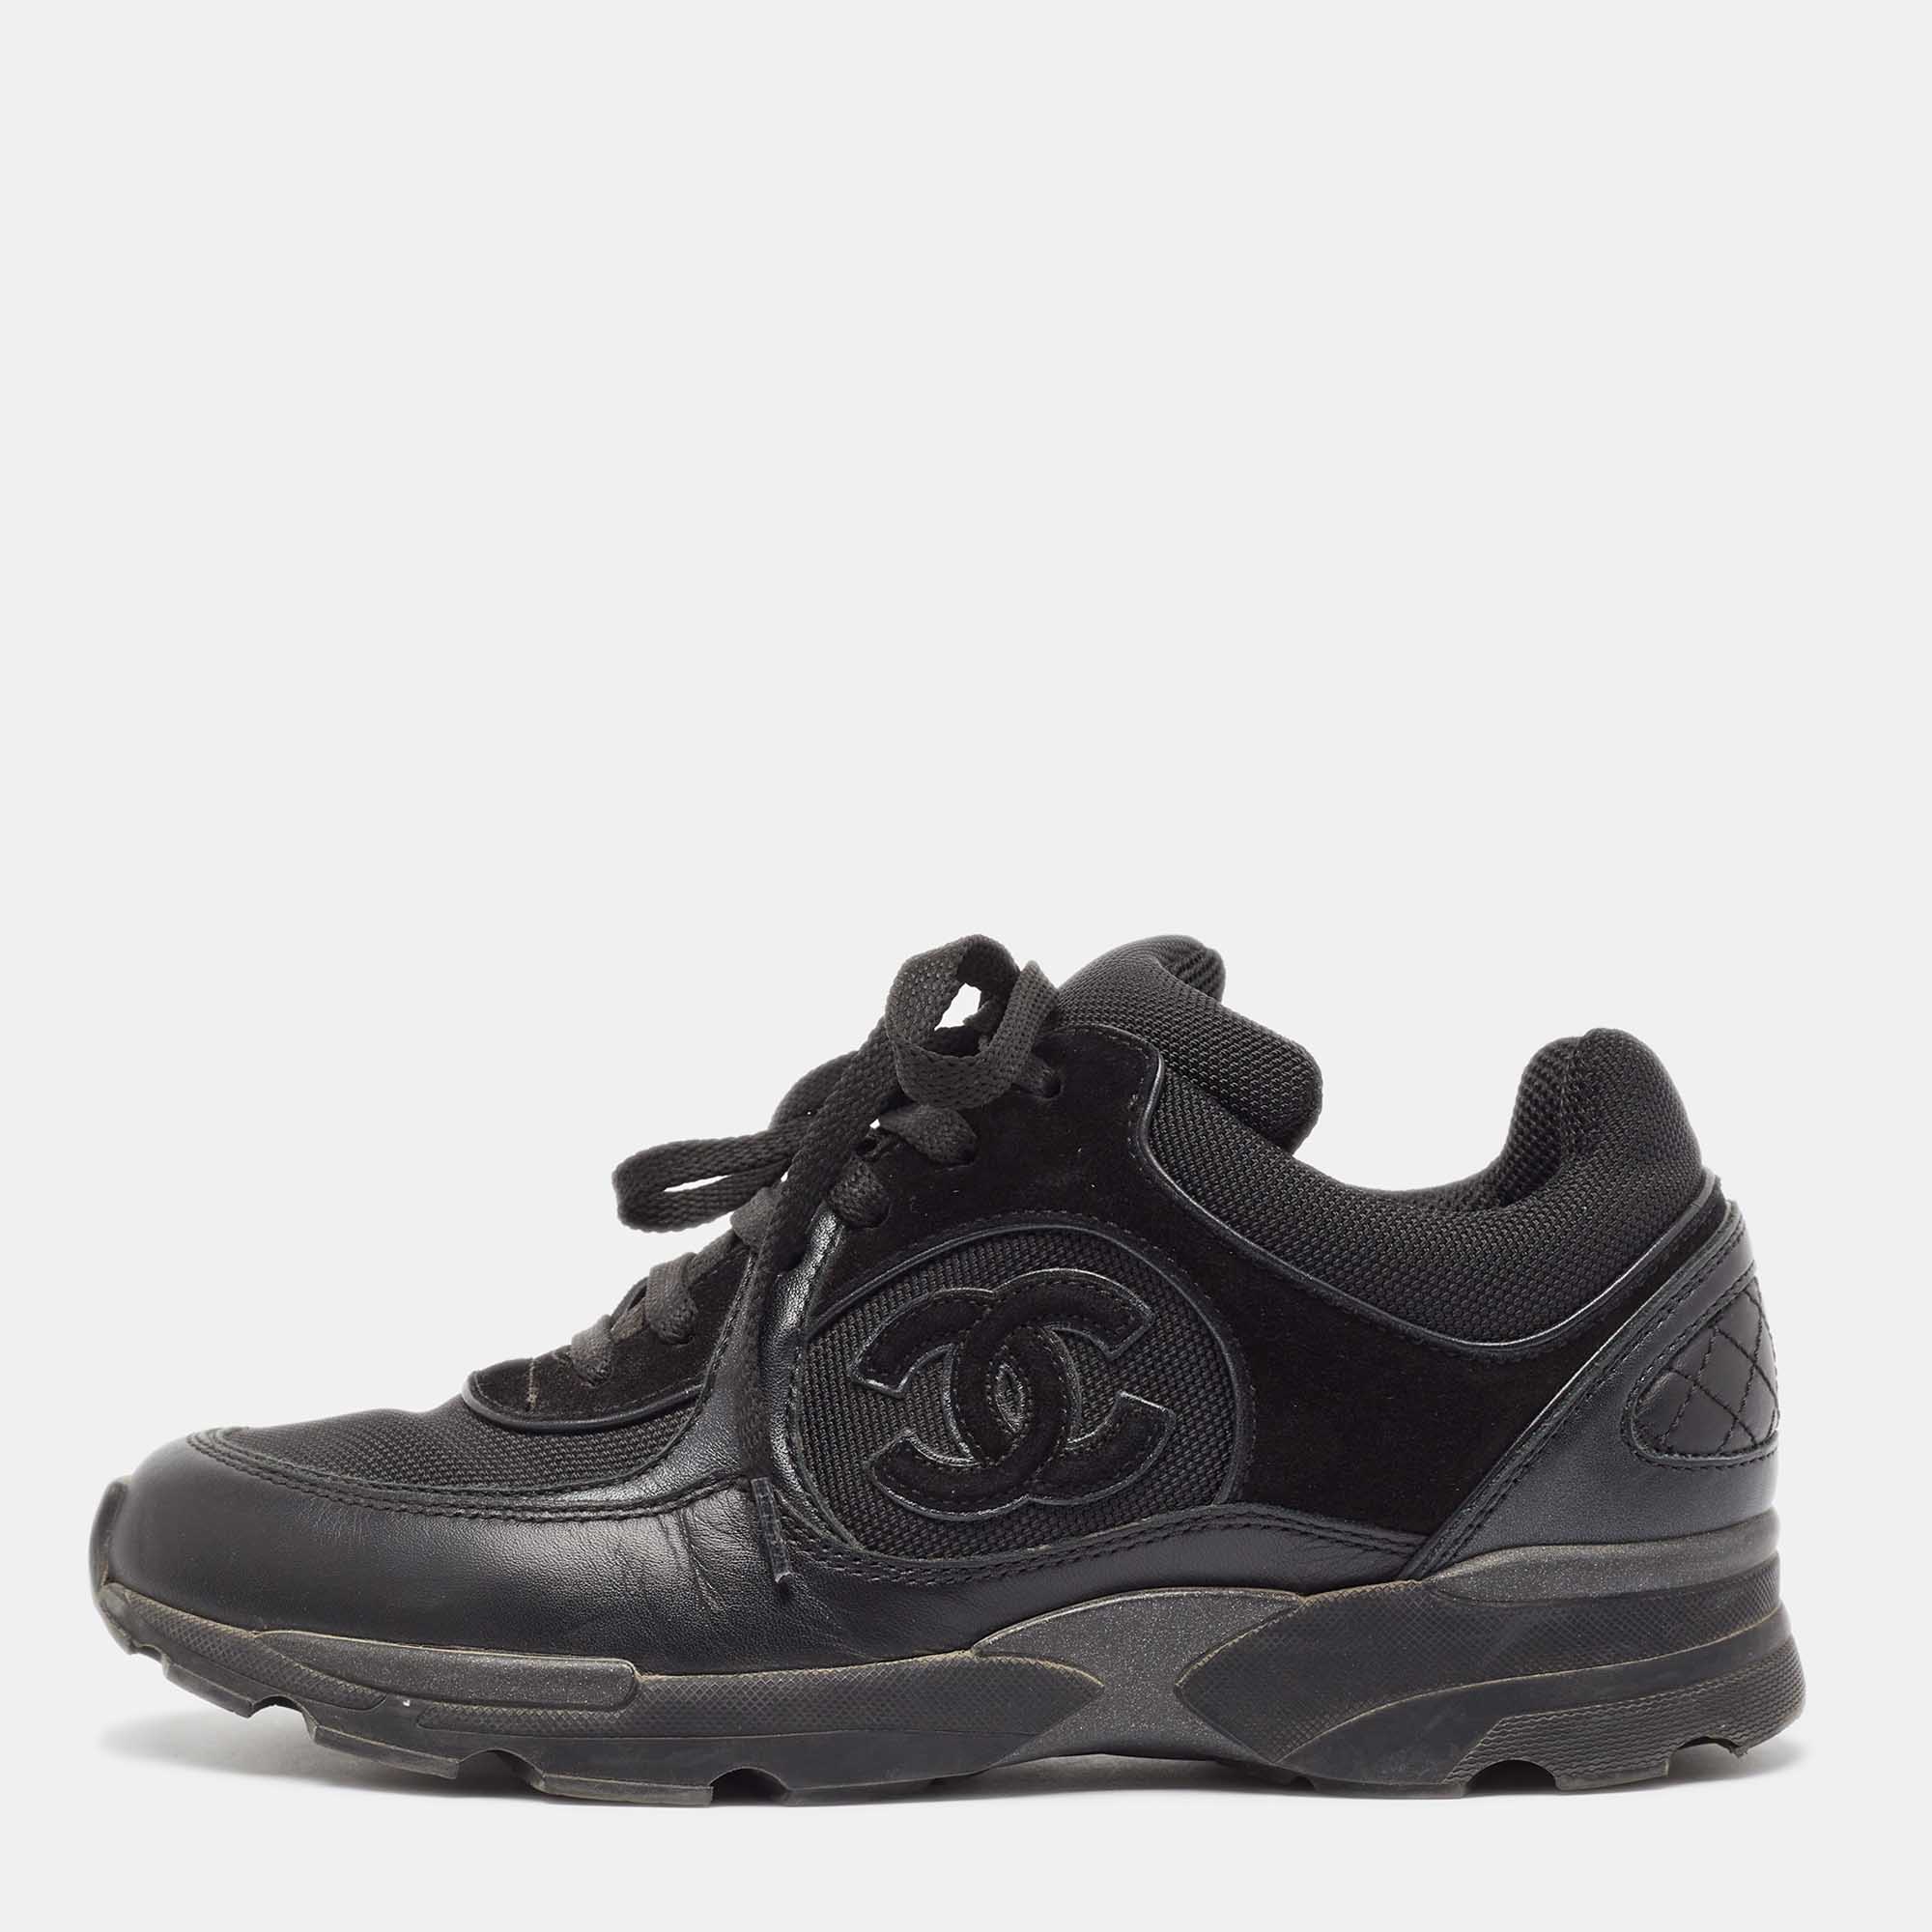 Coming in a classic silhouette these Chanel black sneakers are a seamless combination of luxury comfort and style. These sneakers are finished with signature details and comfortable insoles.